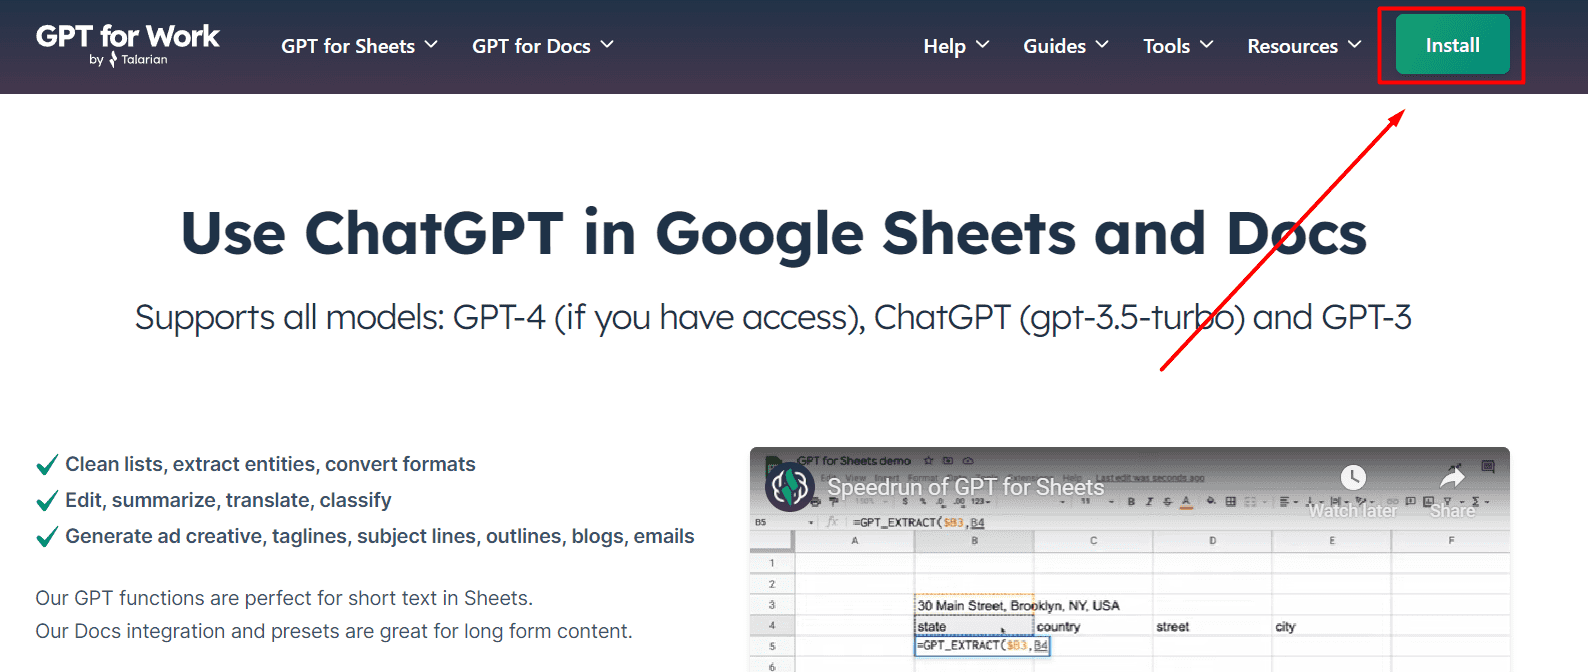 How to install GPT For Sheets